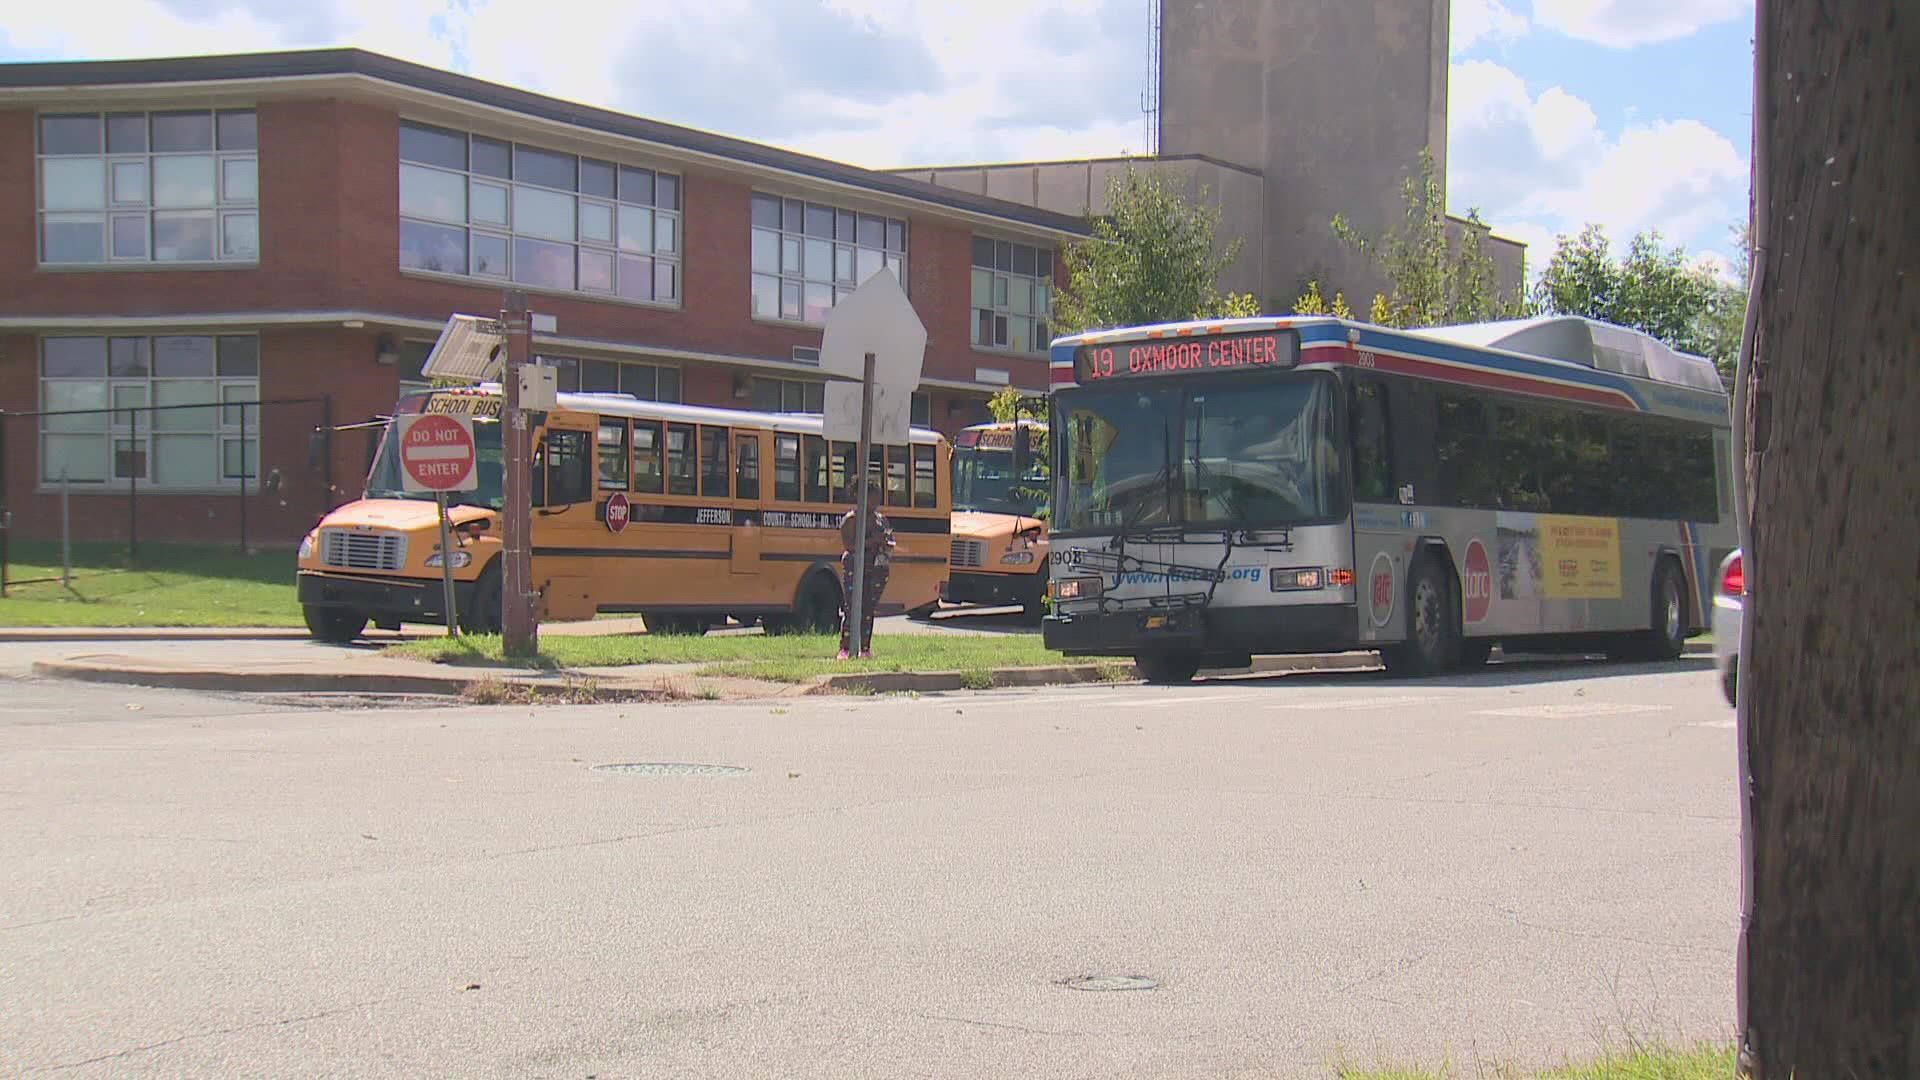 "Community members need to be held responsible for their actions and this is a community issue, not the fault of JCPS," a JCPS spokesperson said.